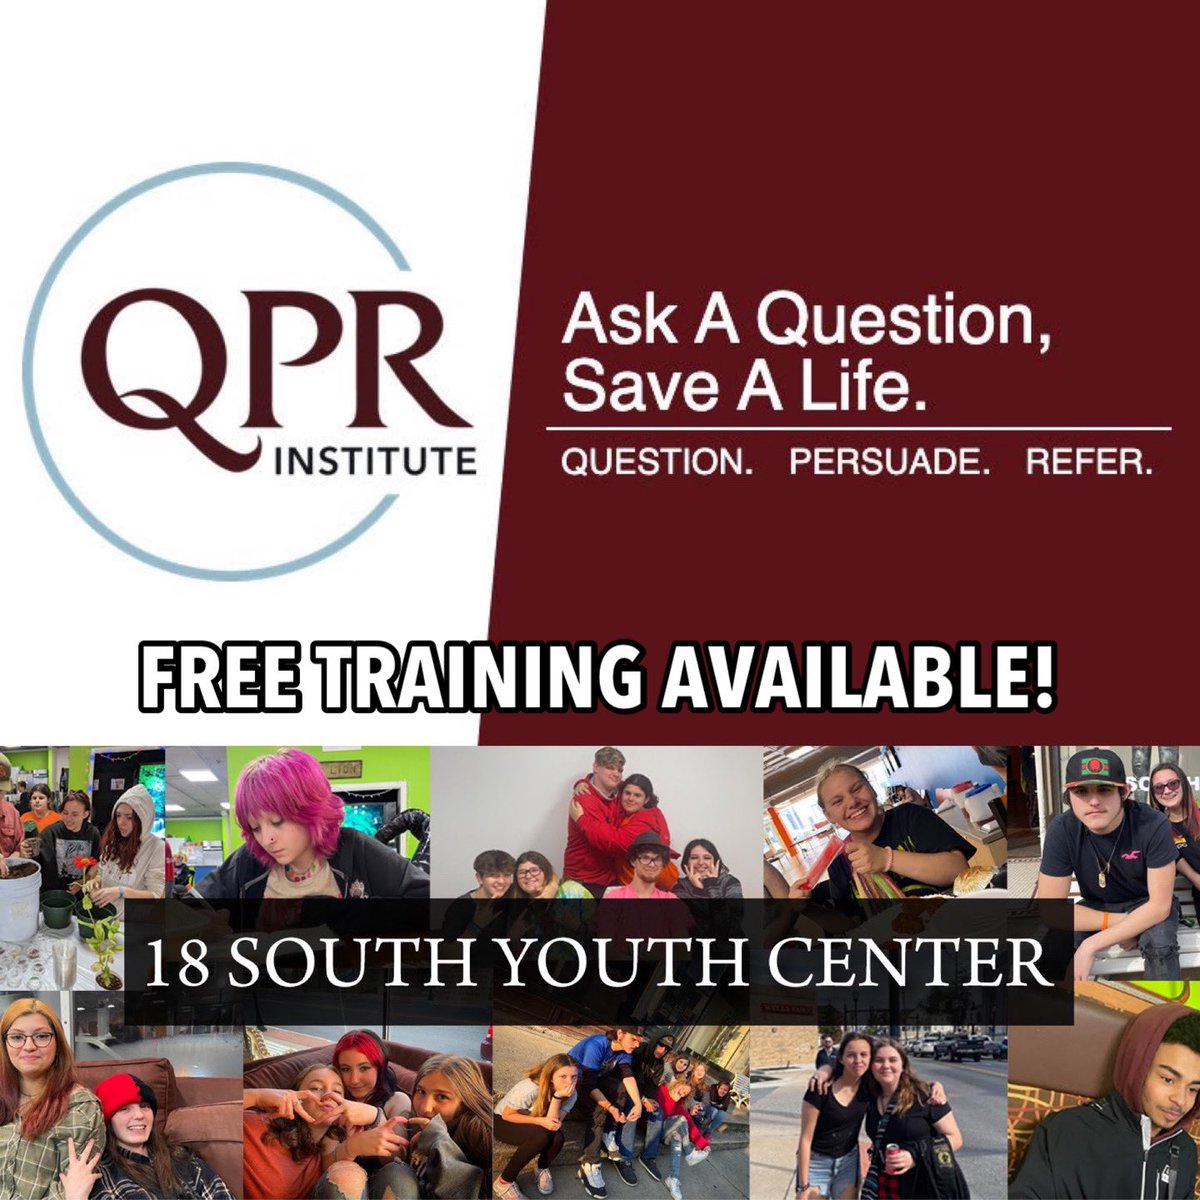 FREE QPR TRAINING AVAILABLE! 🫶🏼
Let’s work together to Stop Suicide! 💙
Contact chris@18south.org to learn more about bringing this lifesaving training to your group in the community! #free #suicideprevention #mentalhealth #stopthestigma #endthesilence #qpr #redlion